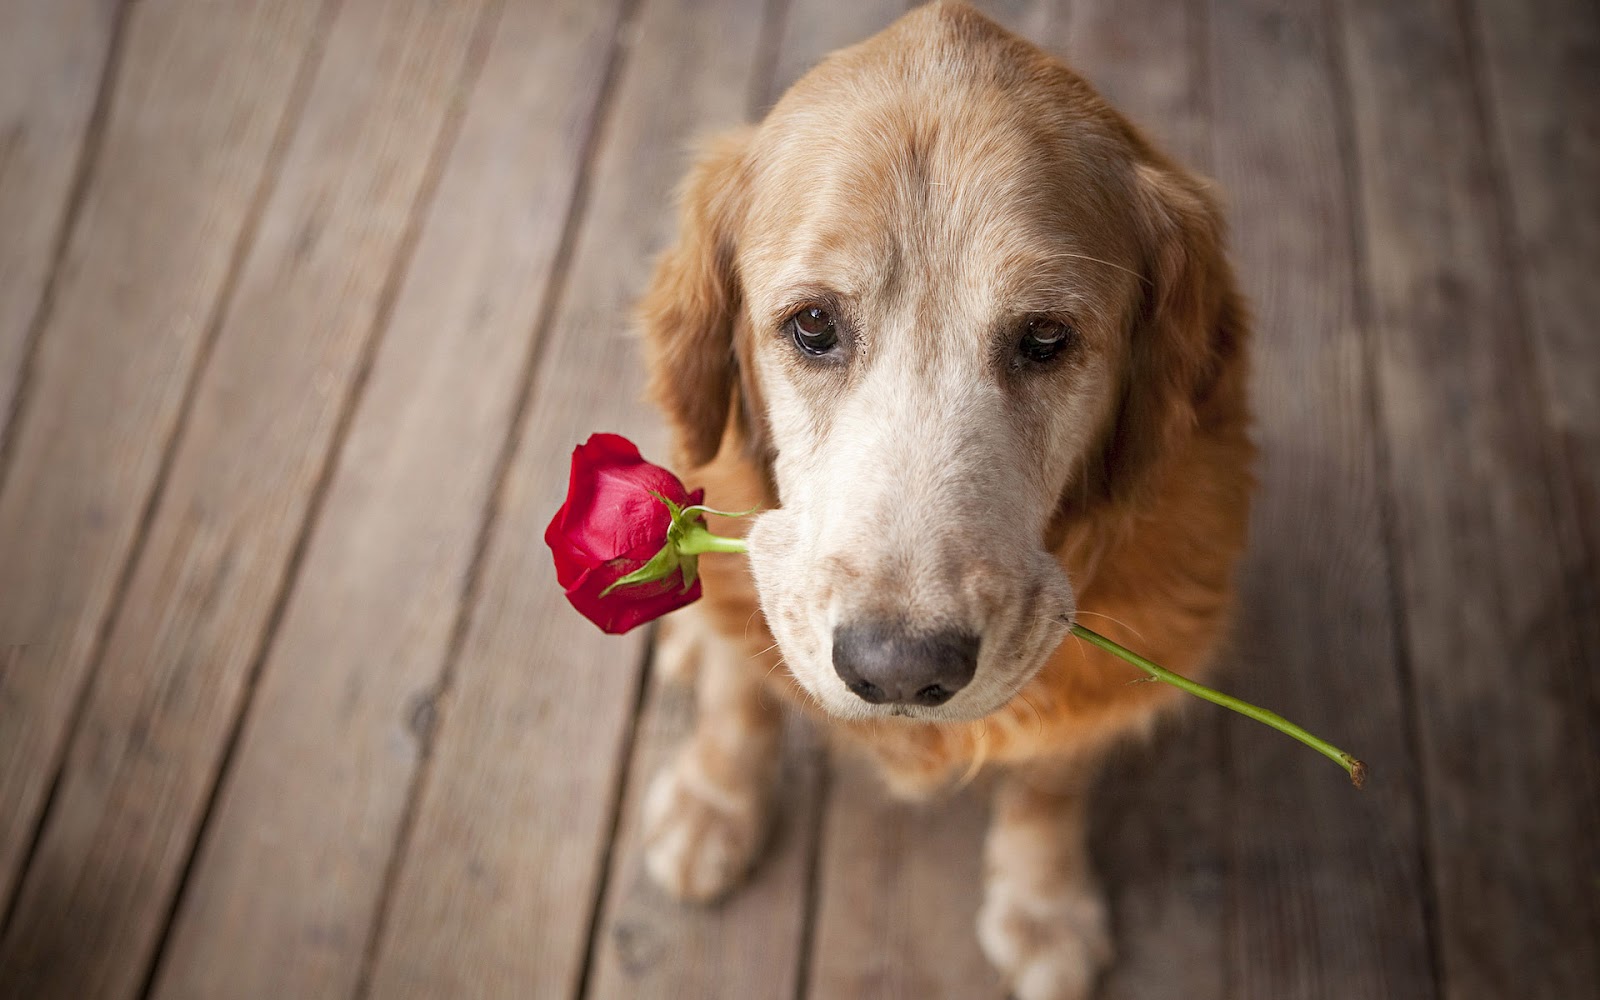 Photo Of A Dog With A Red Rose In His Mouth - Sweetest Day Meme - HD Wallpaper 